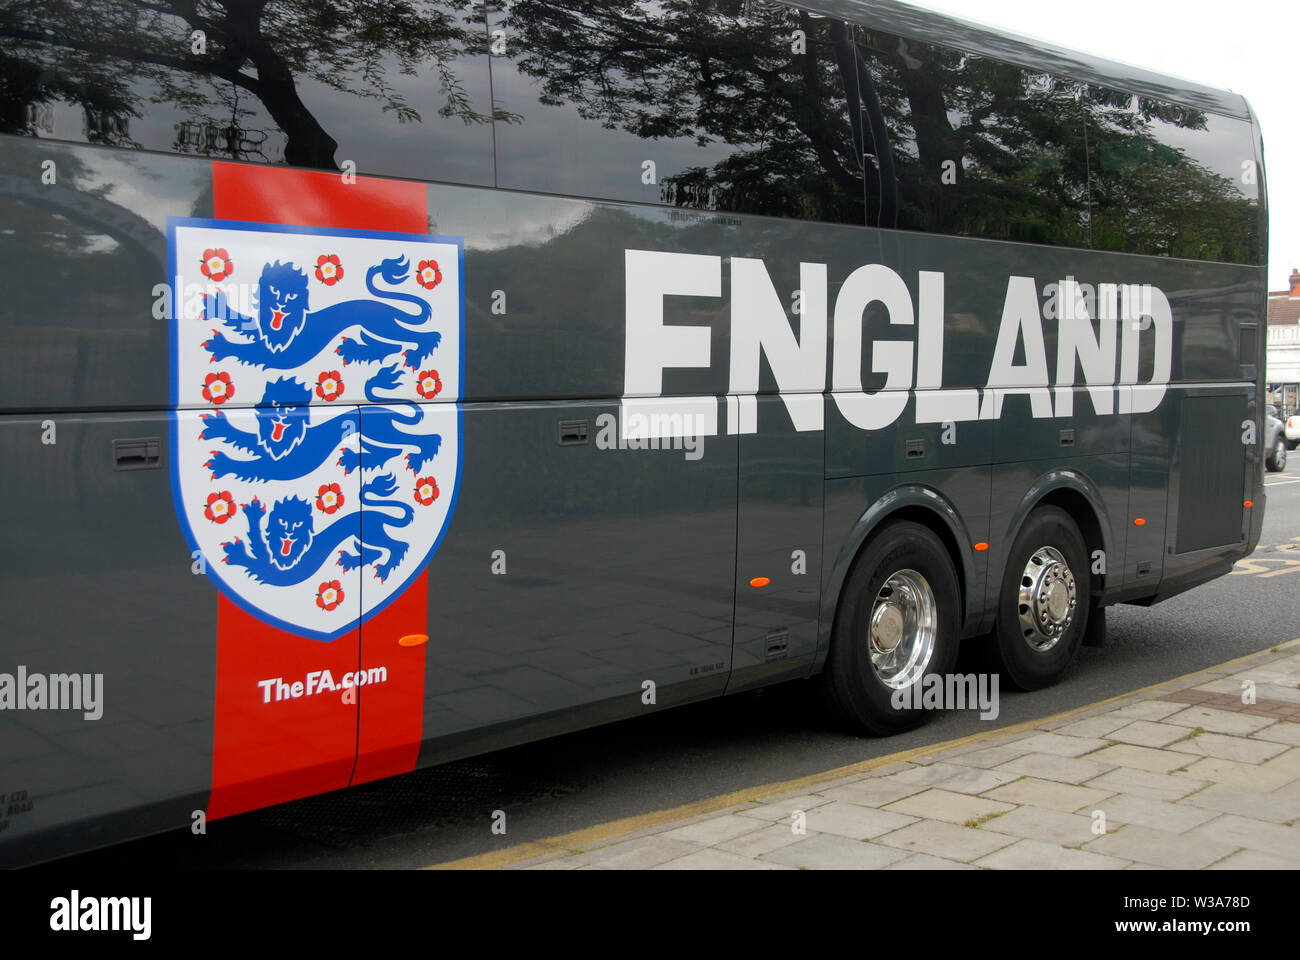 Smart coach for the FA with the word ENGLAND in large letters Stock Photo